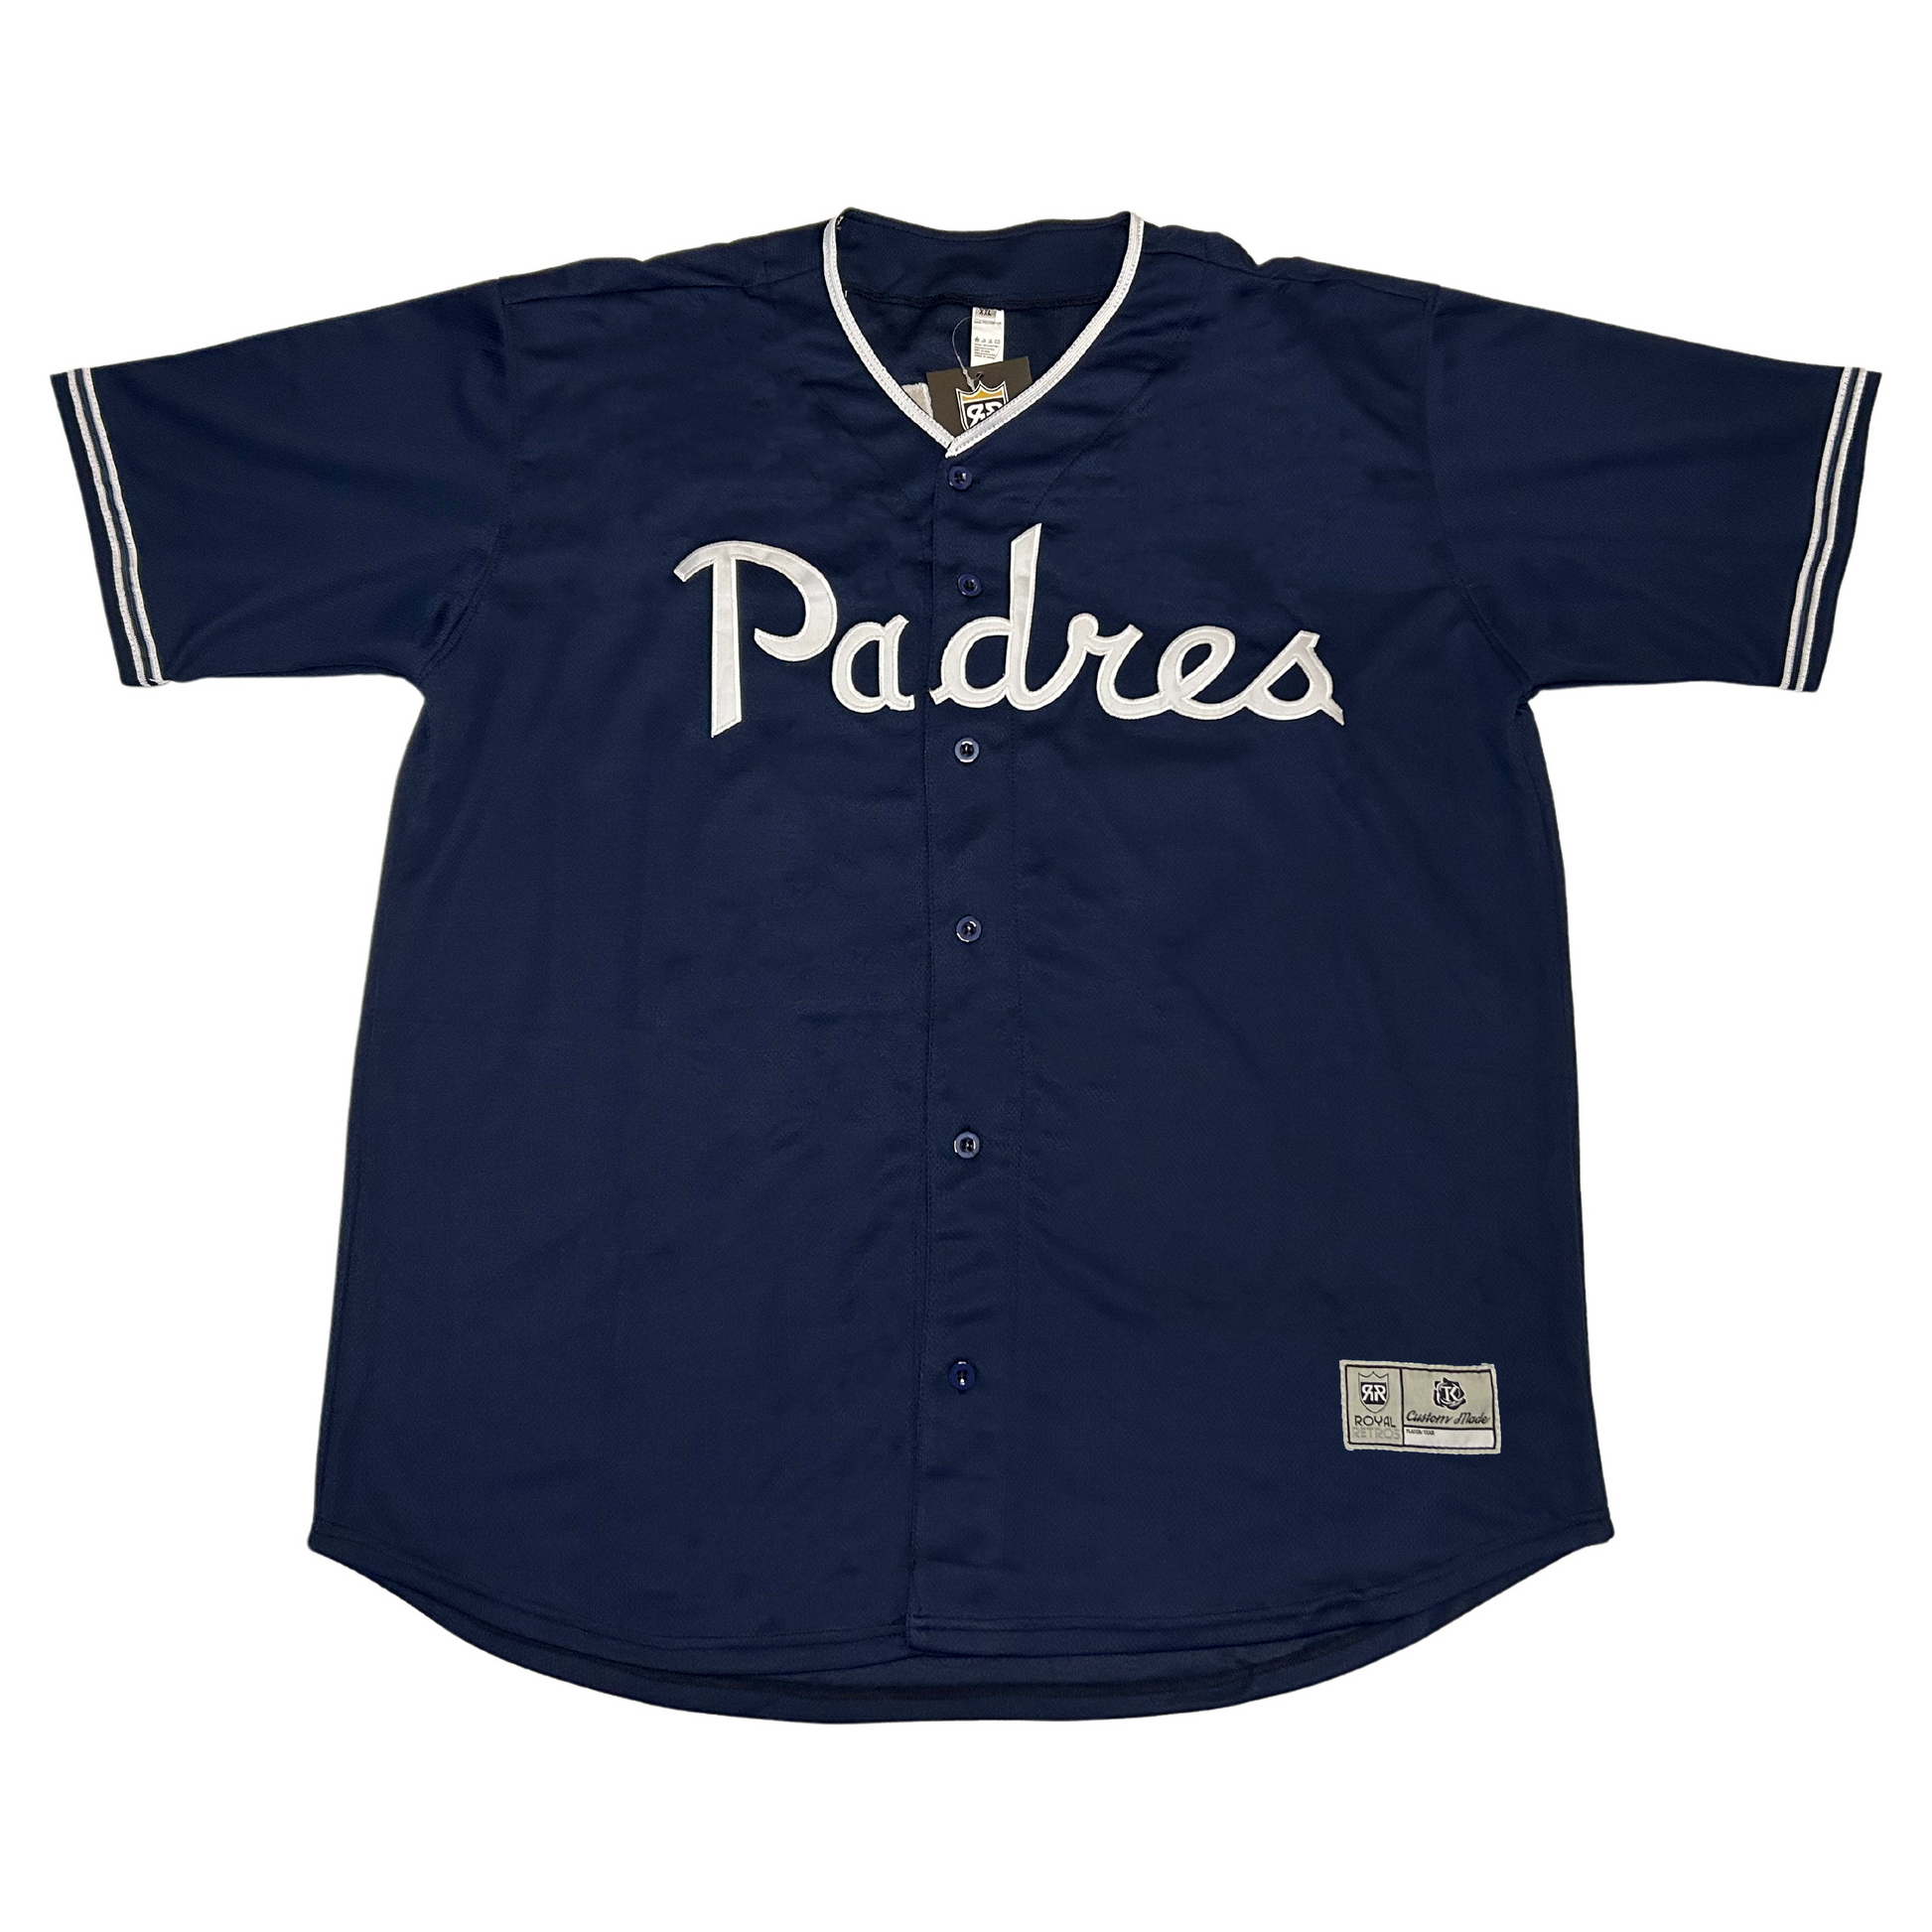 padres 80s jersey